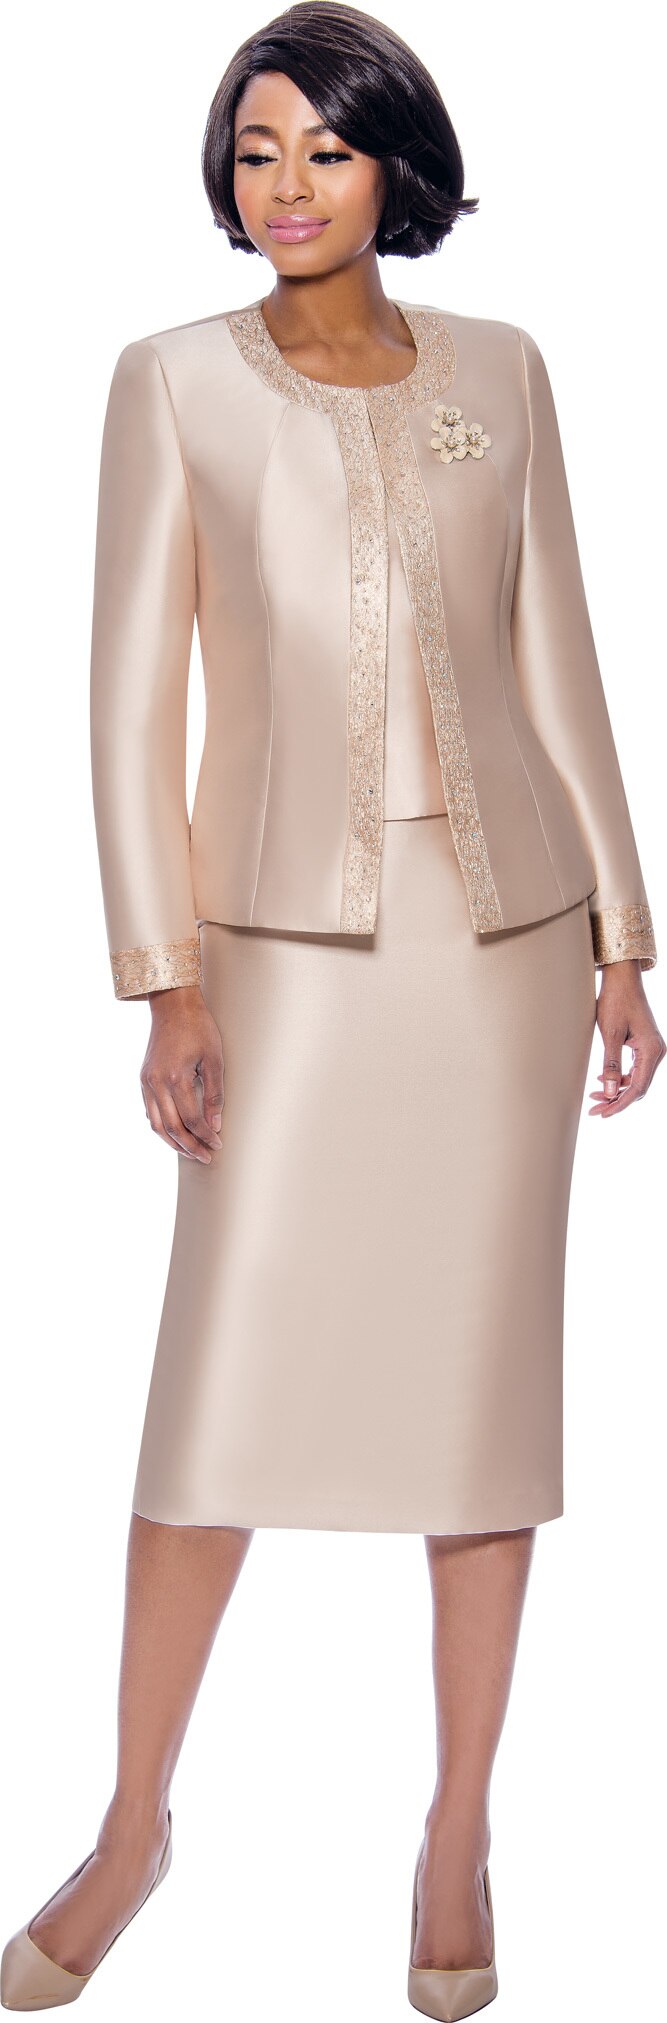 Terramina Suit 7637-Champagne - Church Suits For Less